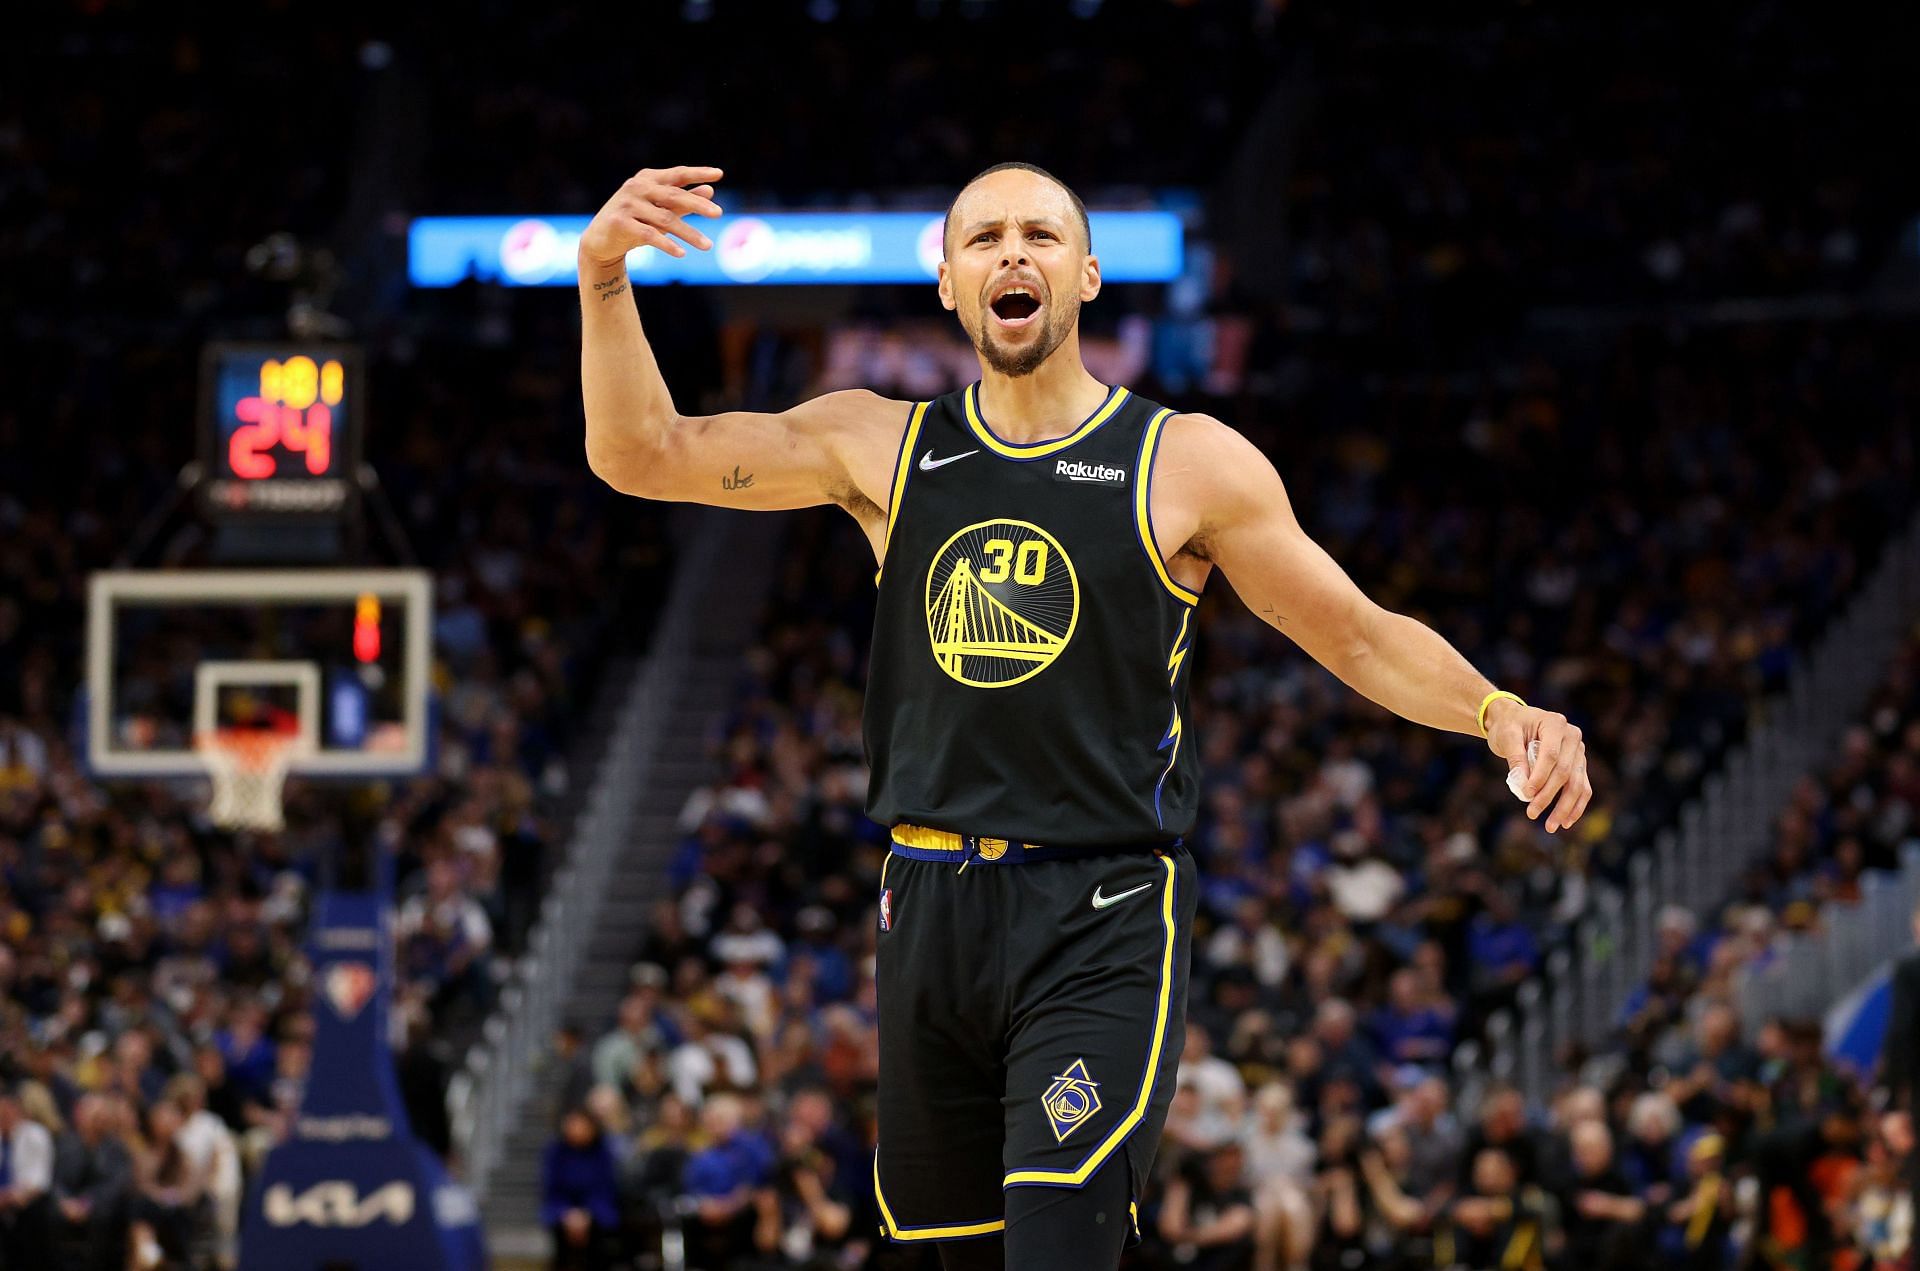 Steph Curry of the Golden State Warriors against the Denver Nuggets in Game 1 of the first round of the 2022 NBA playoffs